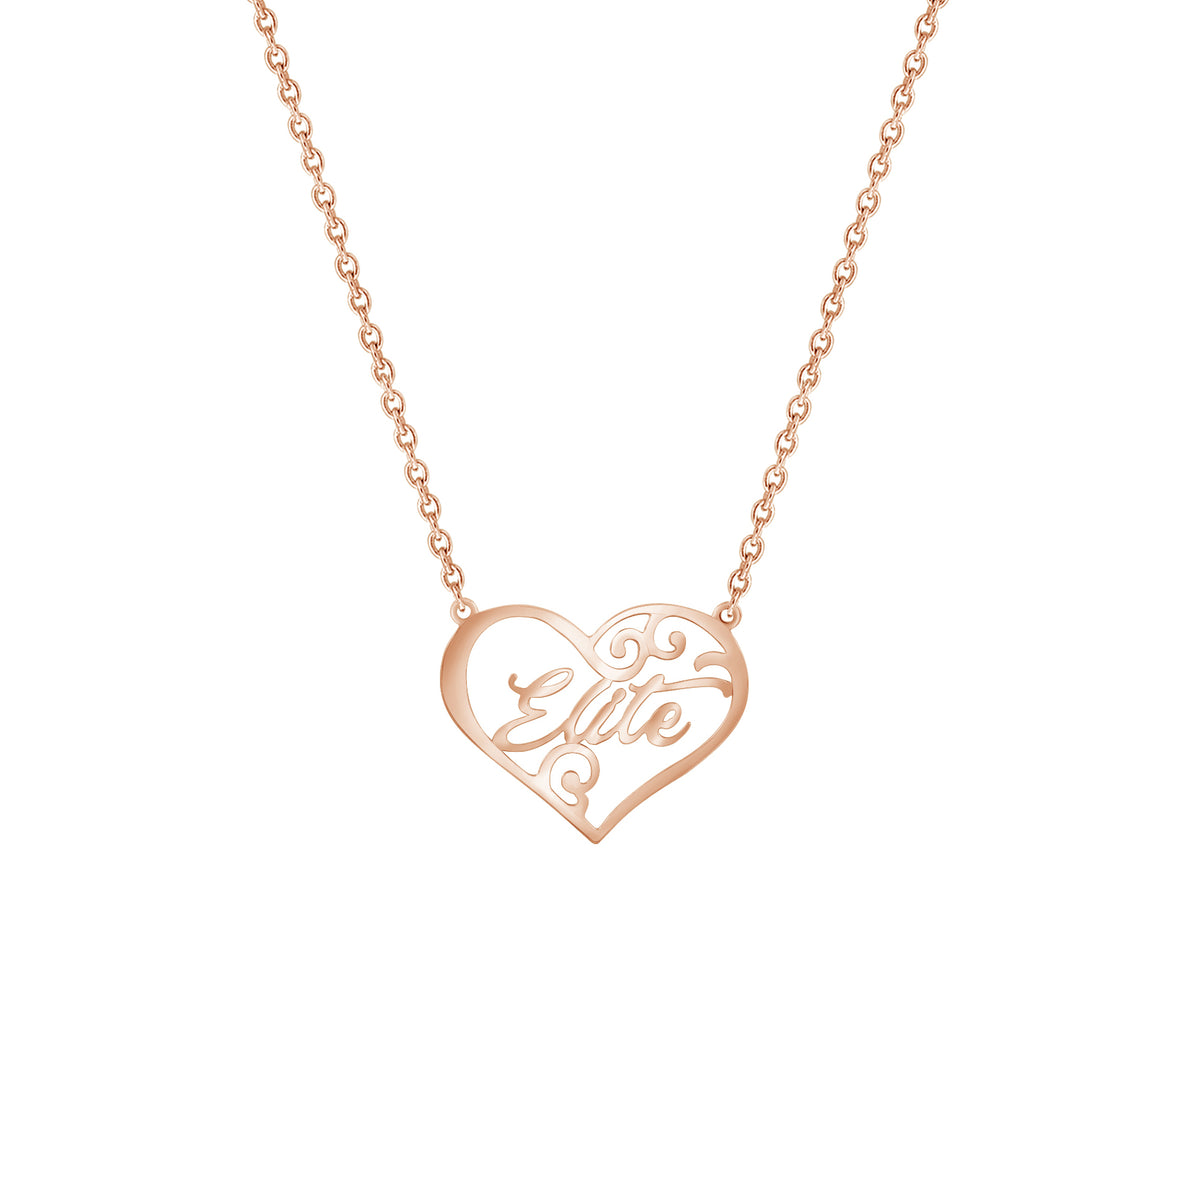 Personalized Name In Heart Pendant Necklace